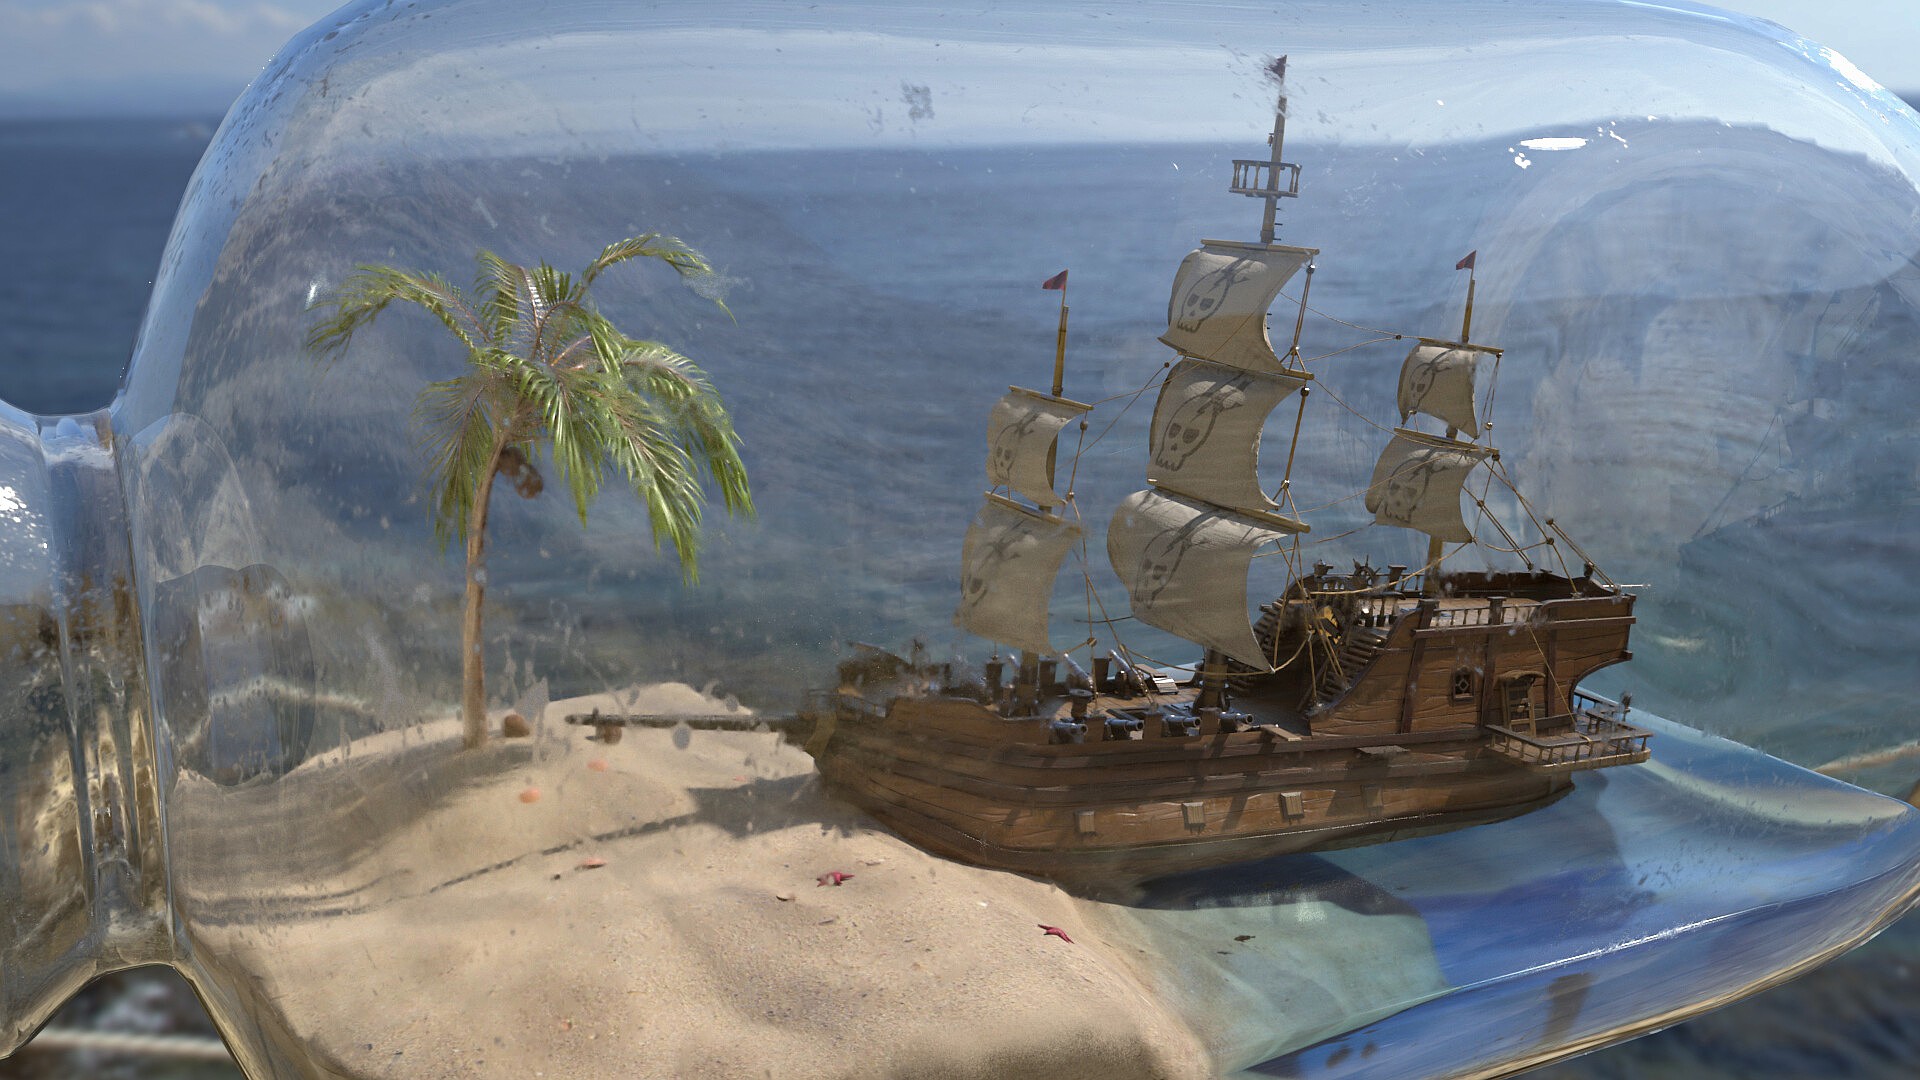 General 1920x1080 Pirate ship coconuts ship water bottles sand palm trees miniatures closeup